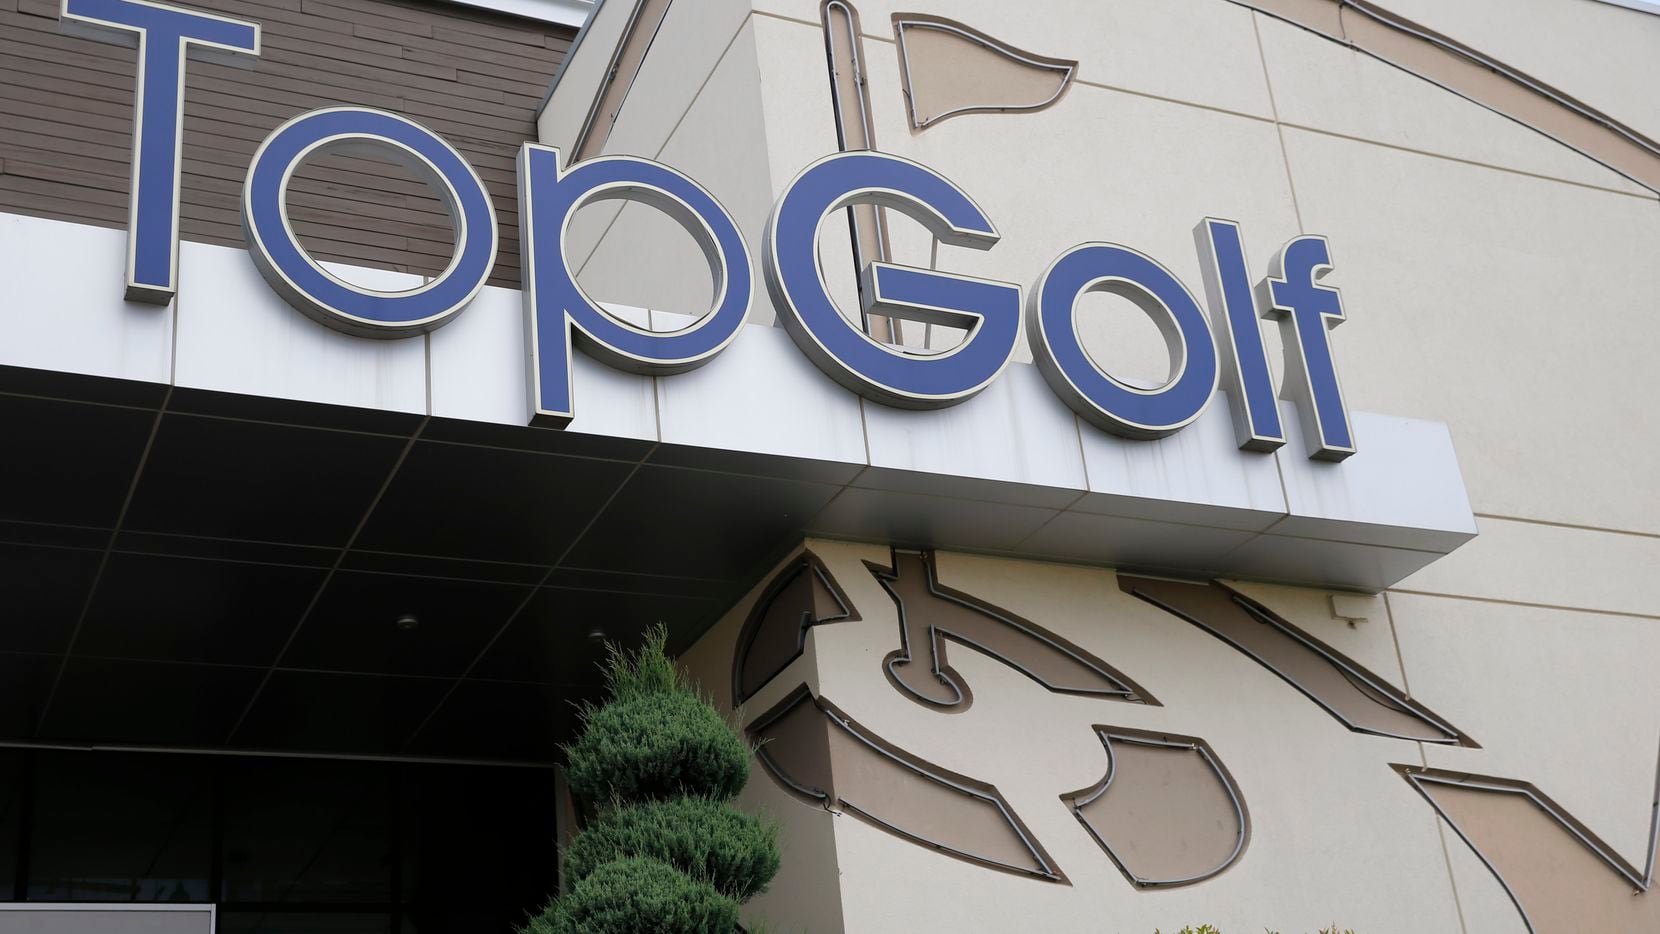 Topgolf, fresh off its merger deal with Callaway, is setting its sight on international...